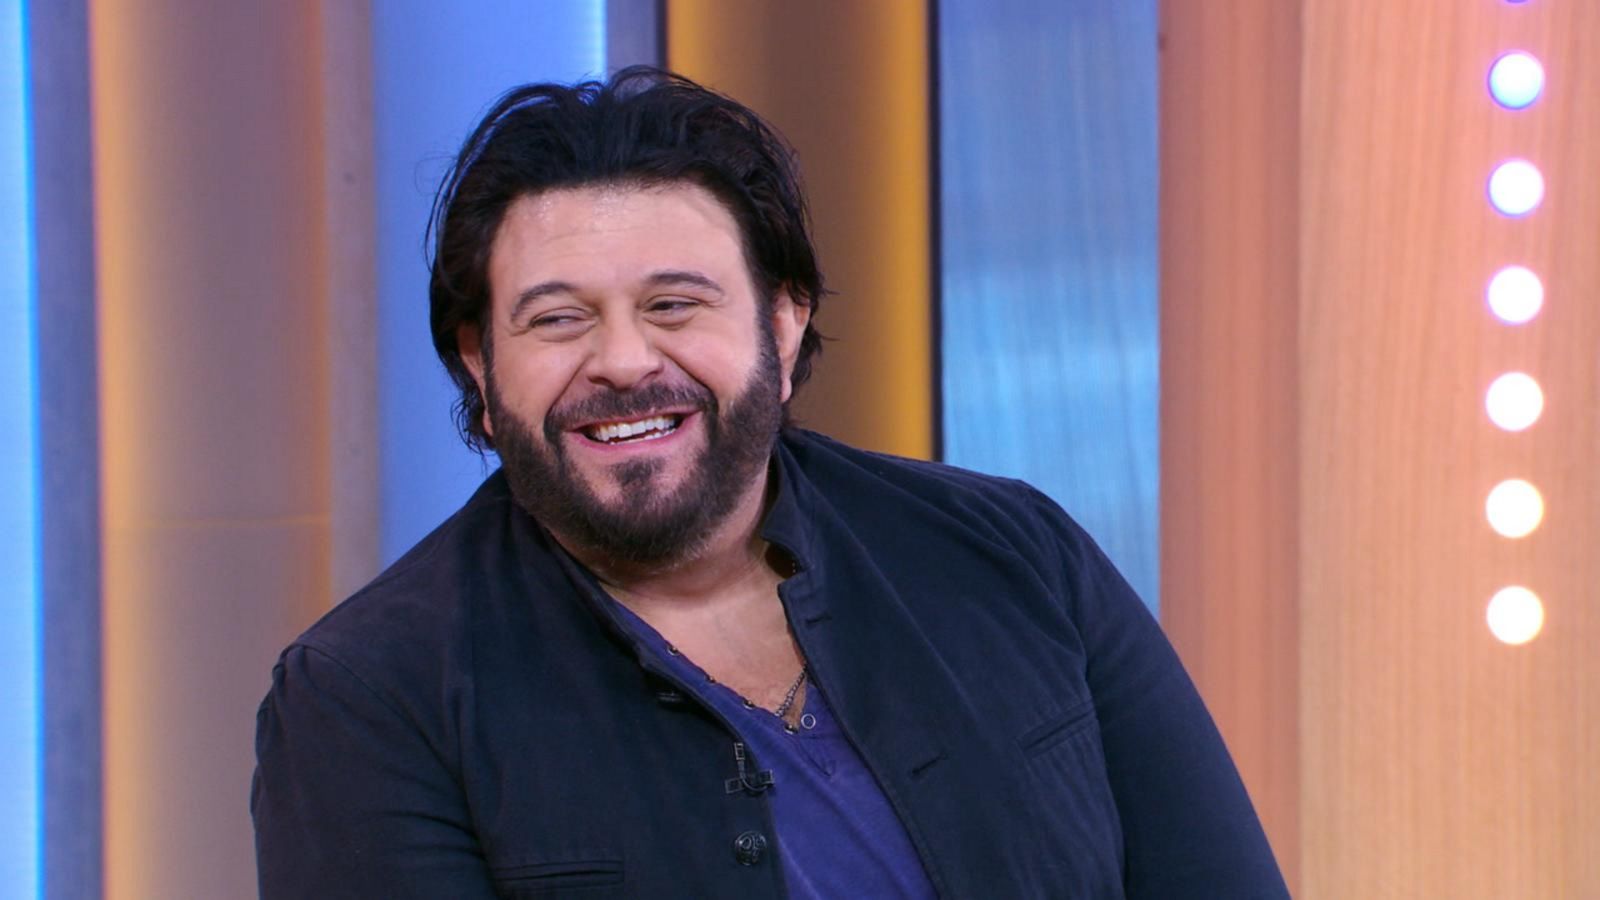 HISTORY Channel’s Adam Richman dishes on 'The Food That Built America